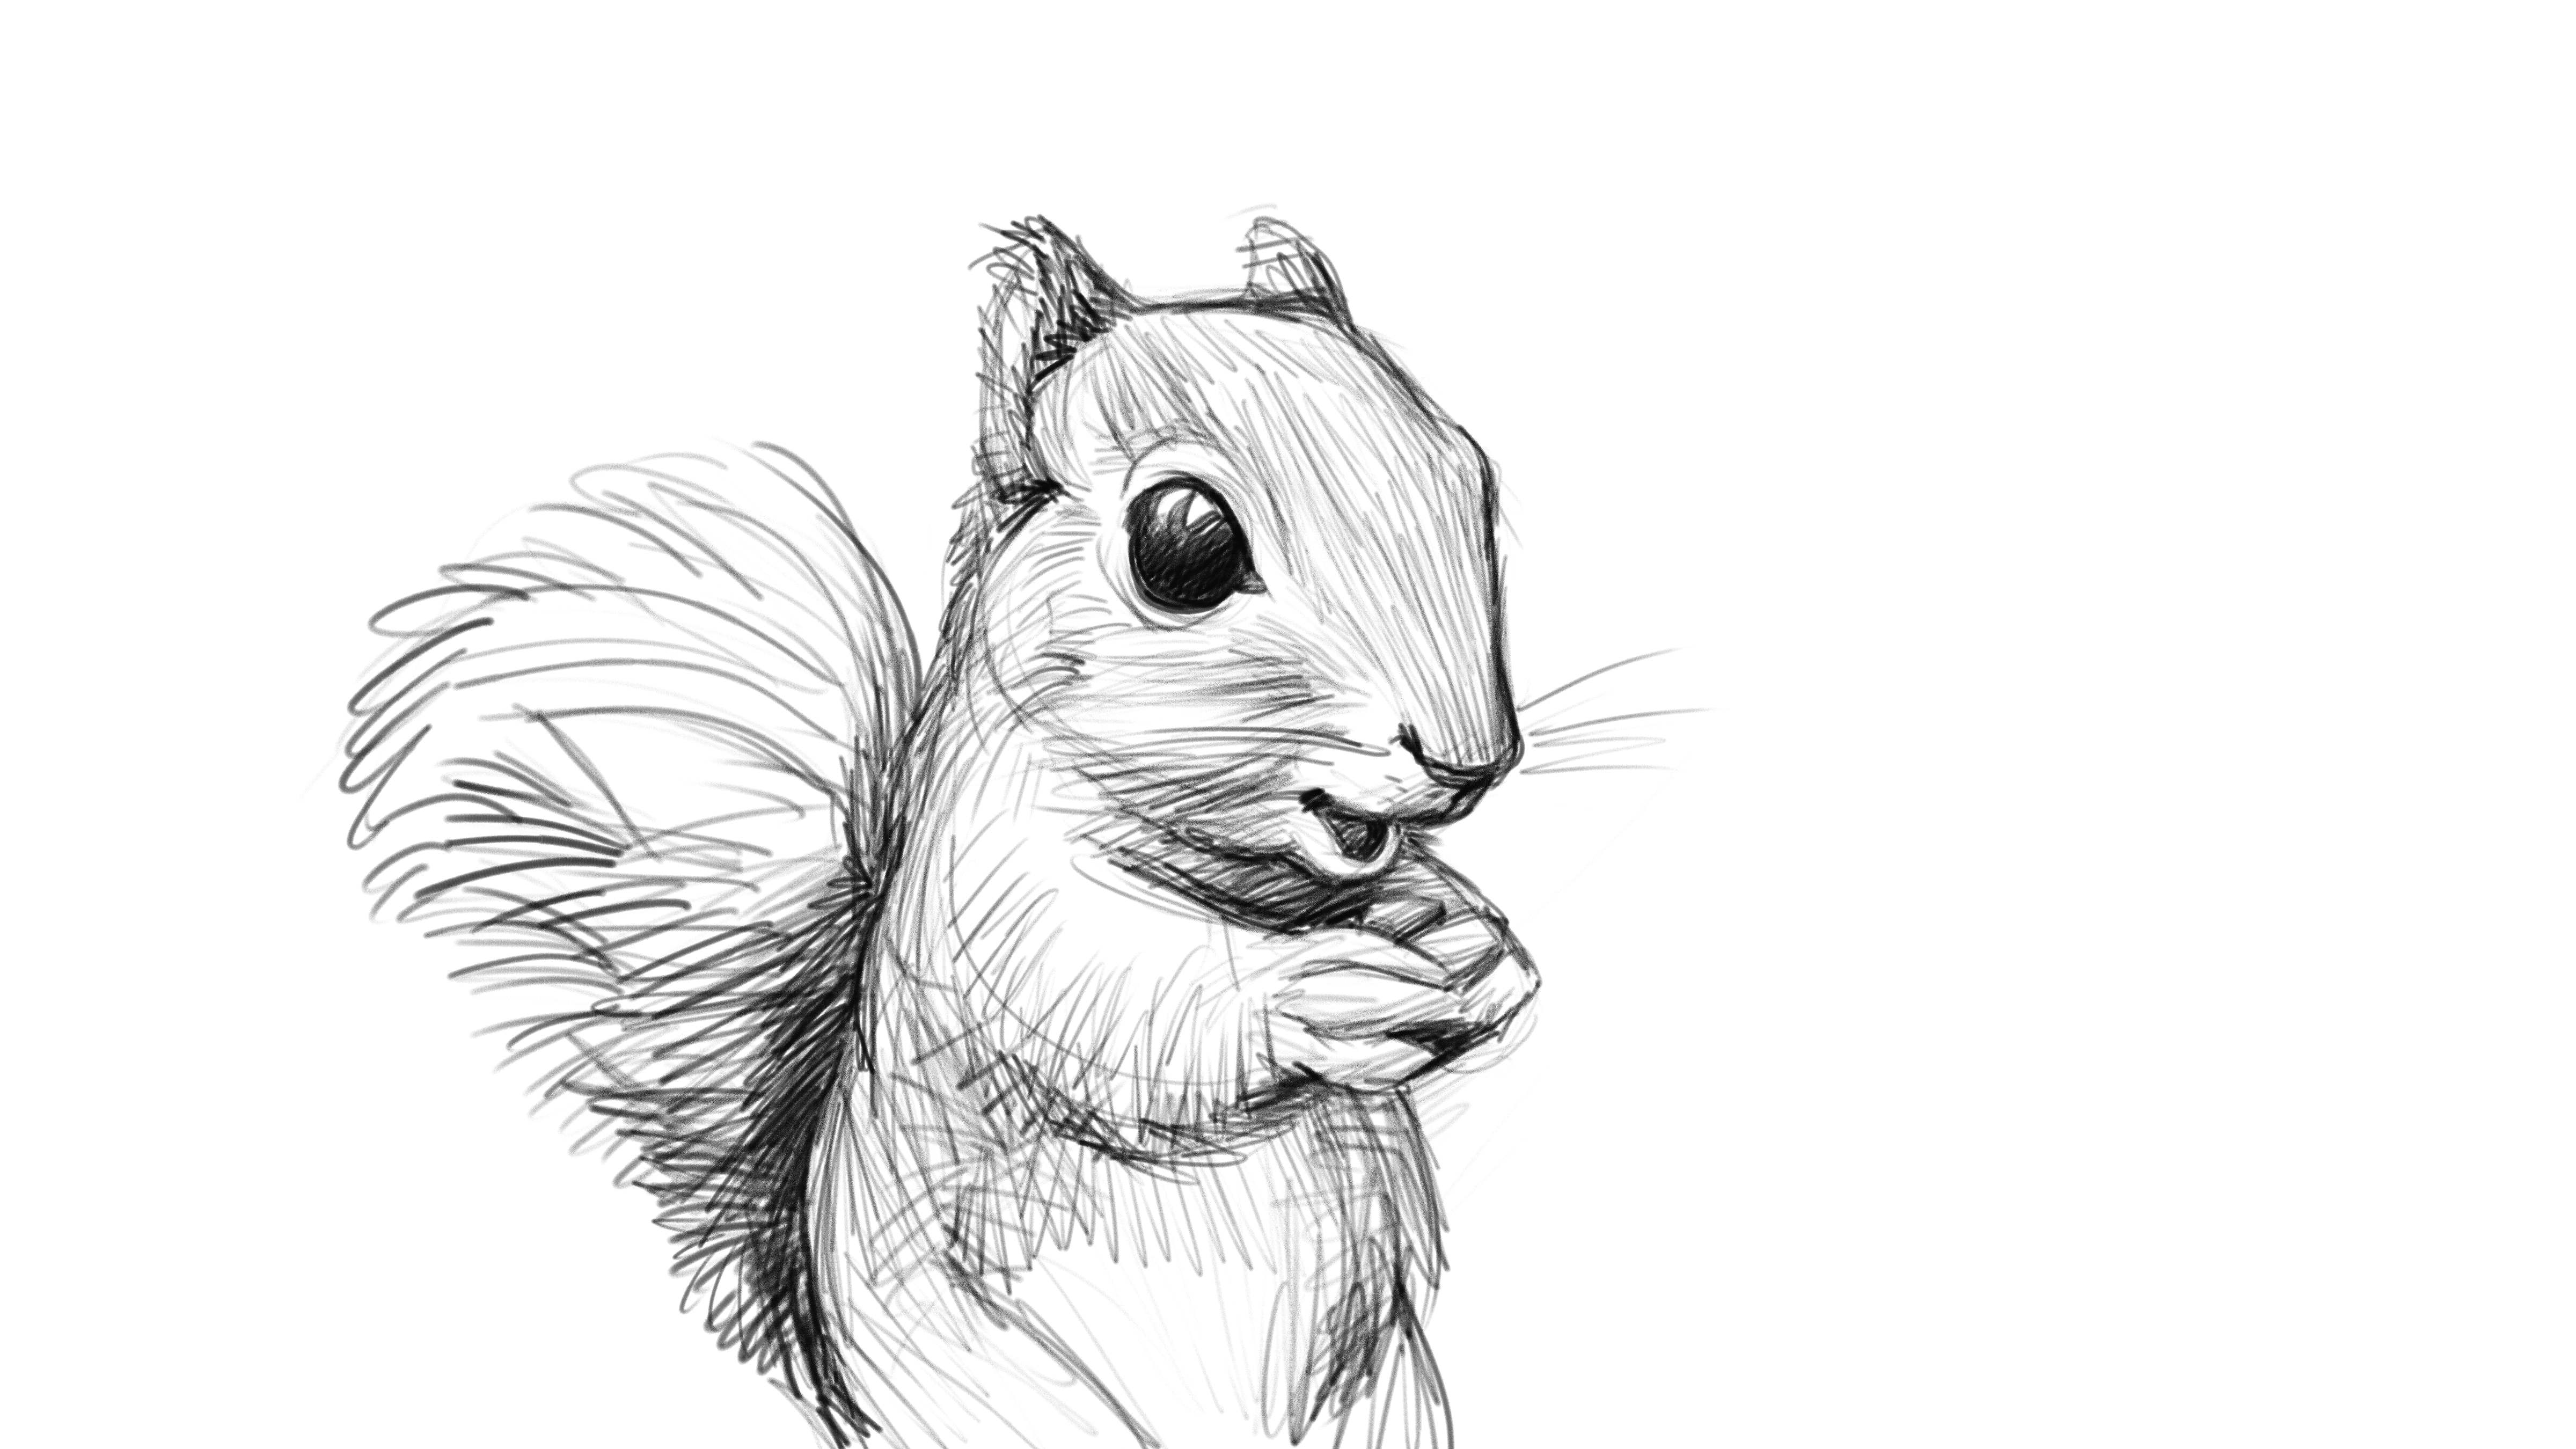 Feeling Squirrely…Sketches in Corel #Painter | Steve Thomason